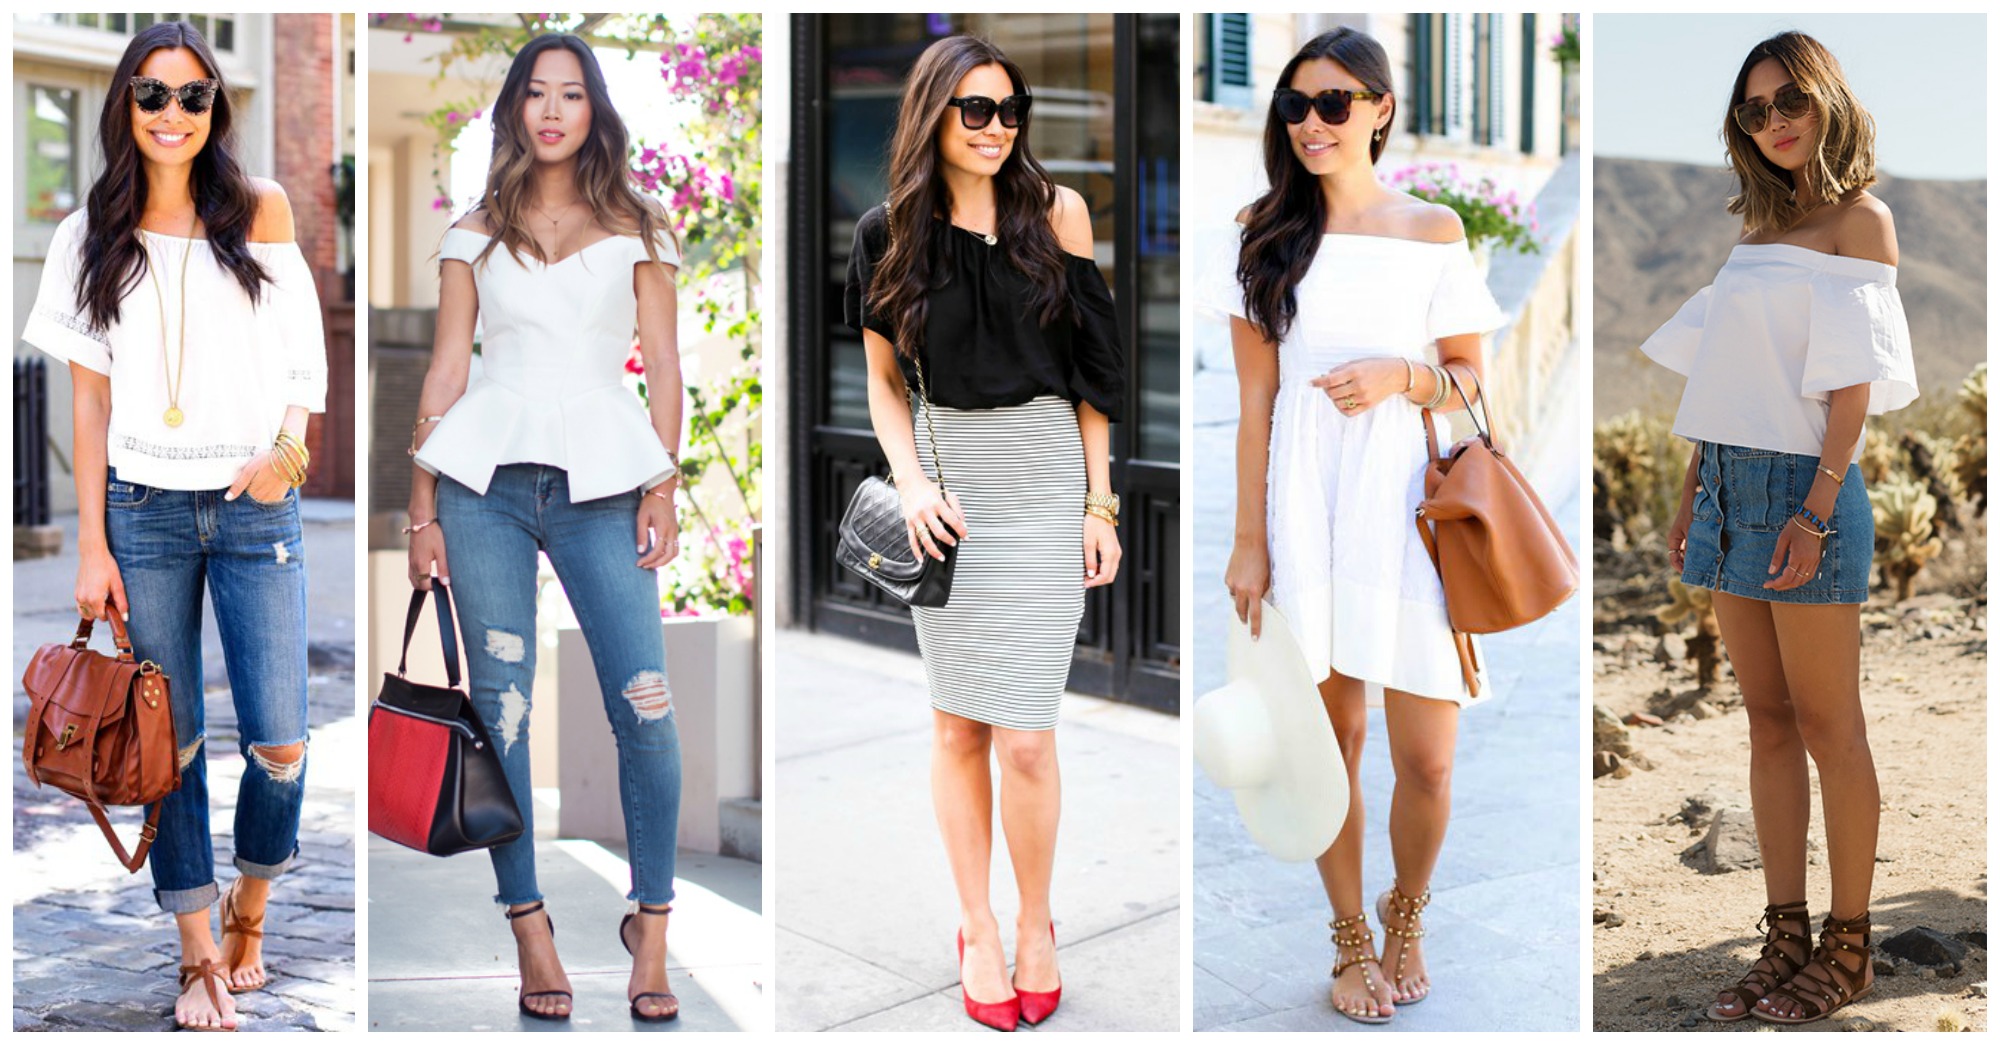 15 Chic Ways to Follow the Off the Shoulders Fashion Trend